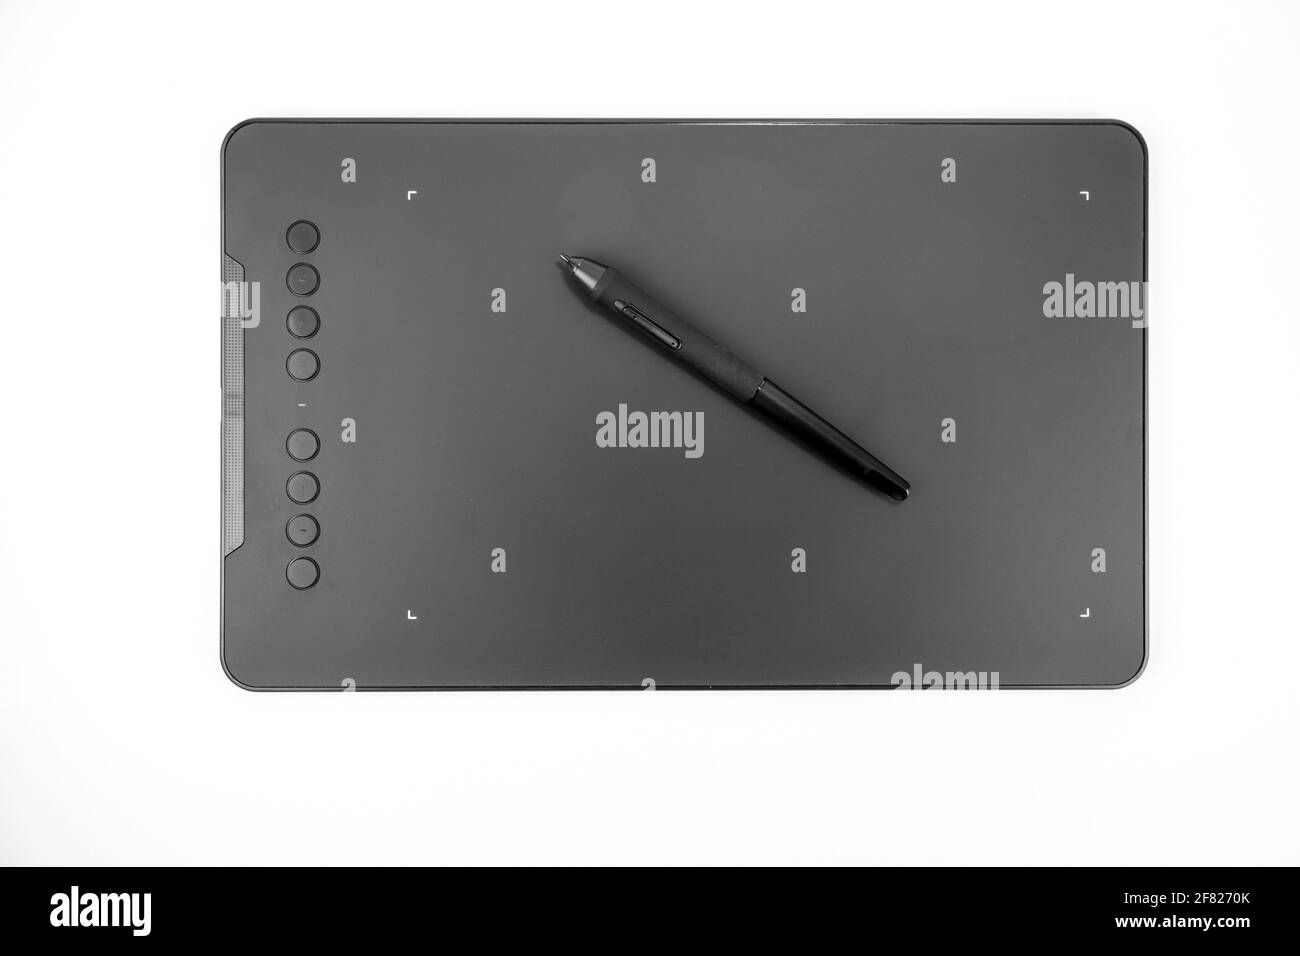 Black graphic tablet with pen for illustrators, designers and photographers, isolated on white background. Stock Photo